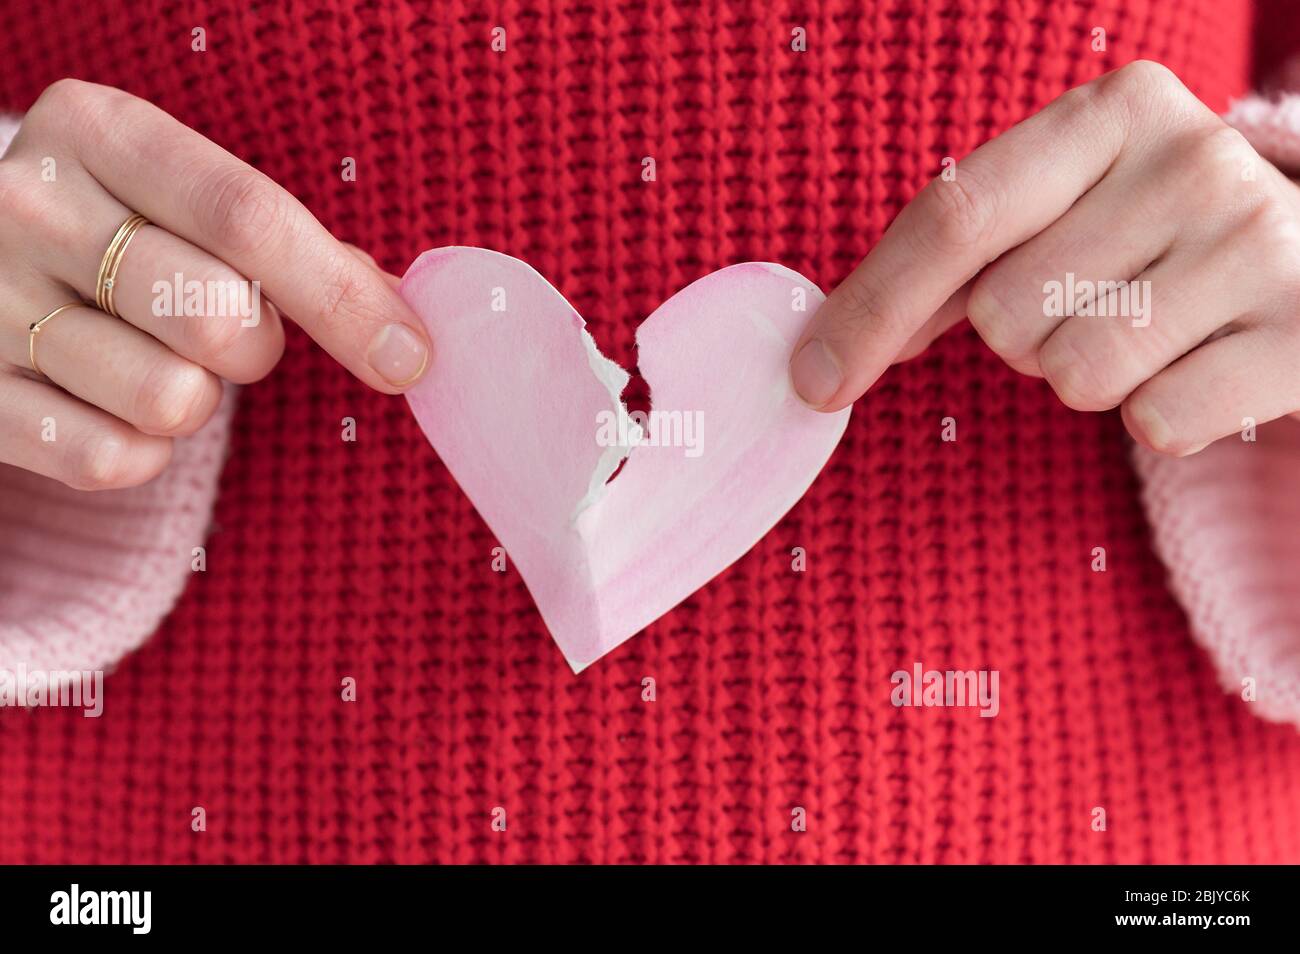 Woman ripping paper heart in half Stock Photo